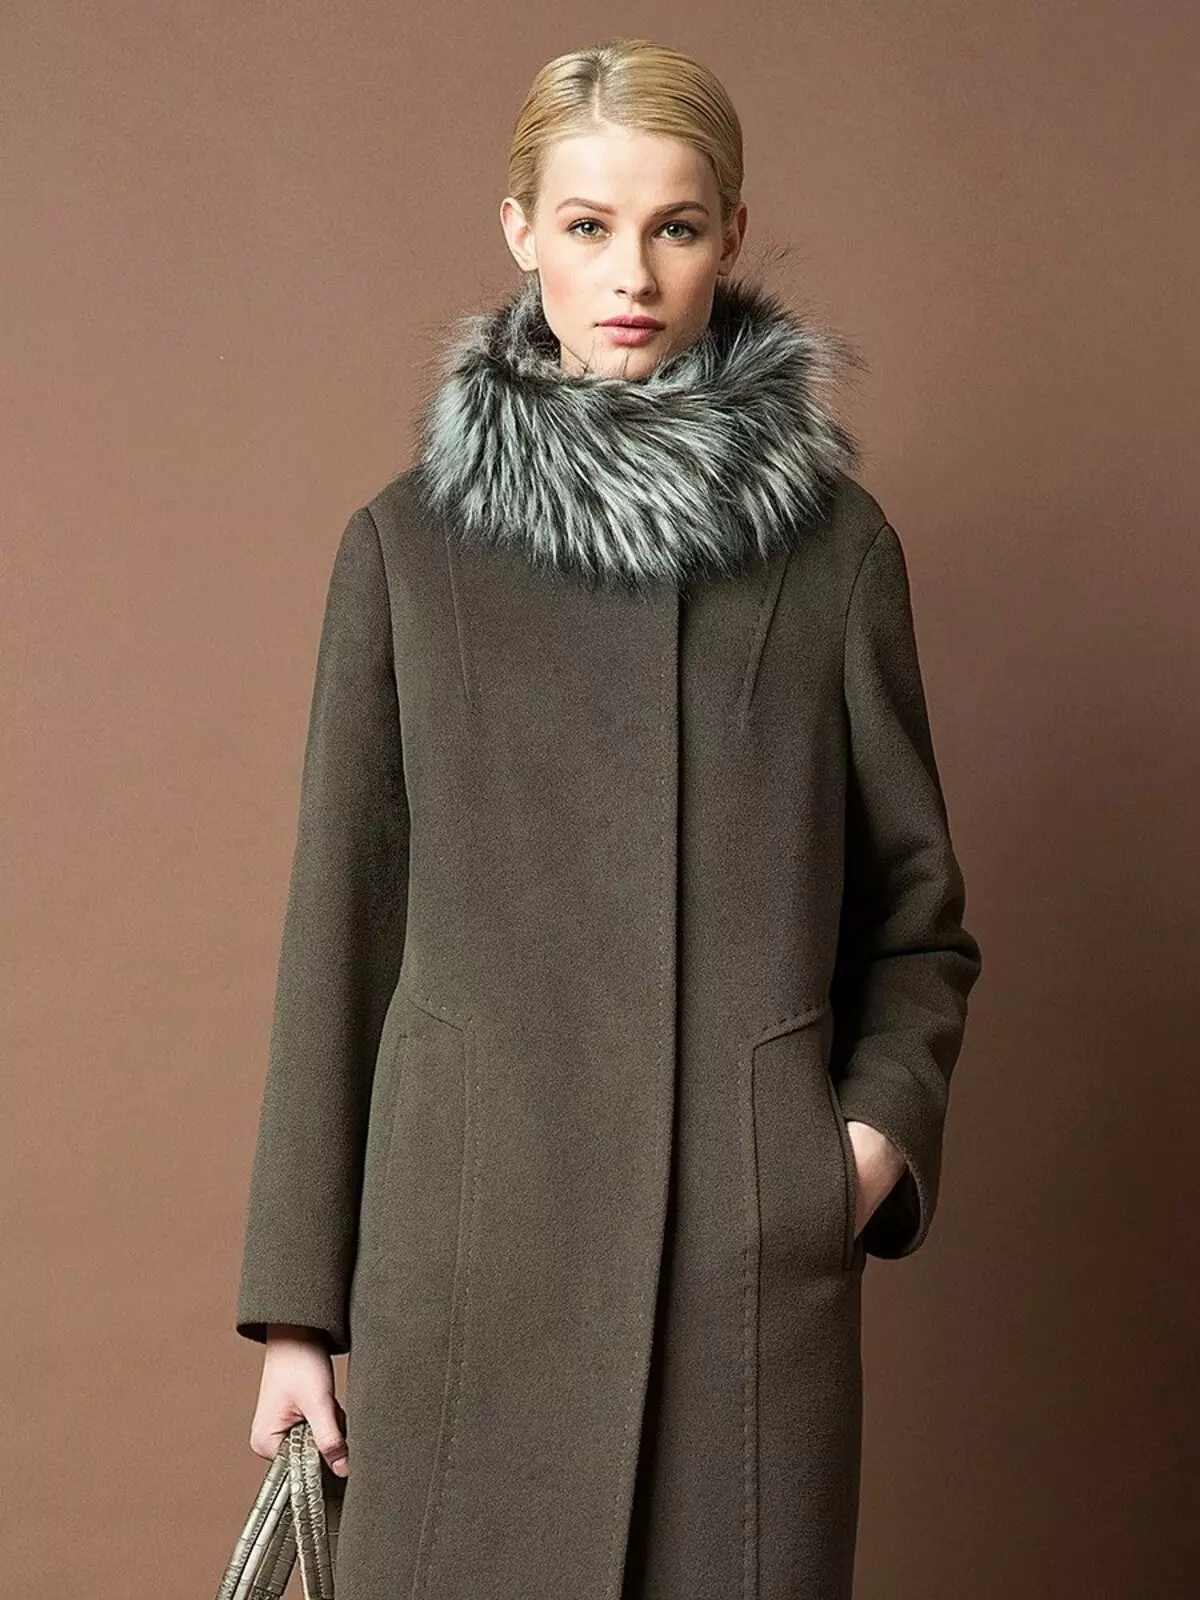 Winter Women's Coat (384 photos): Fashionable 2021 on Sintepsum, Hooded, Youth, Woolen, For Pregnant, Coat Down 643_242